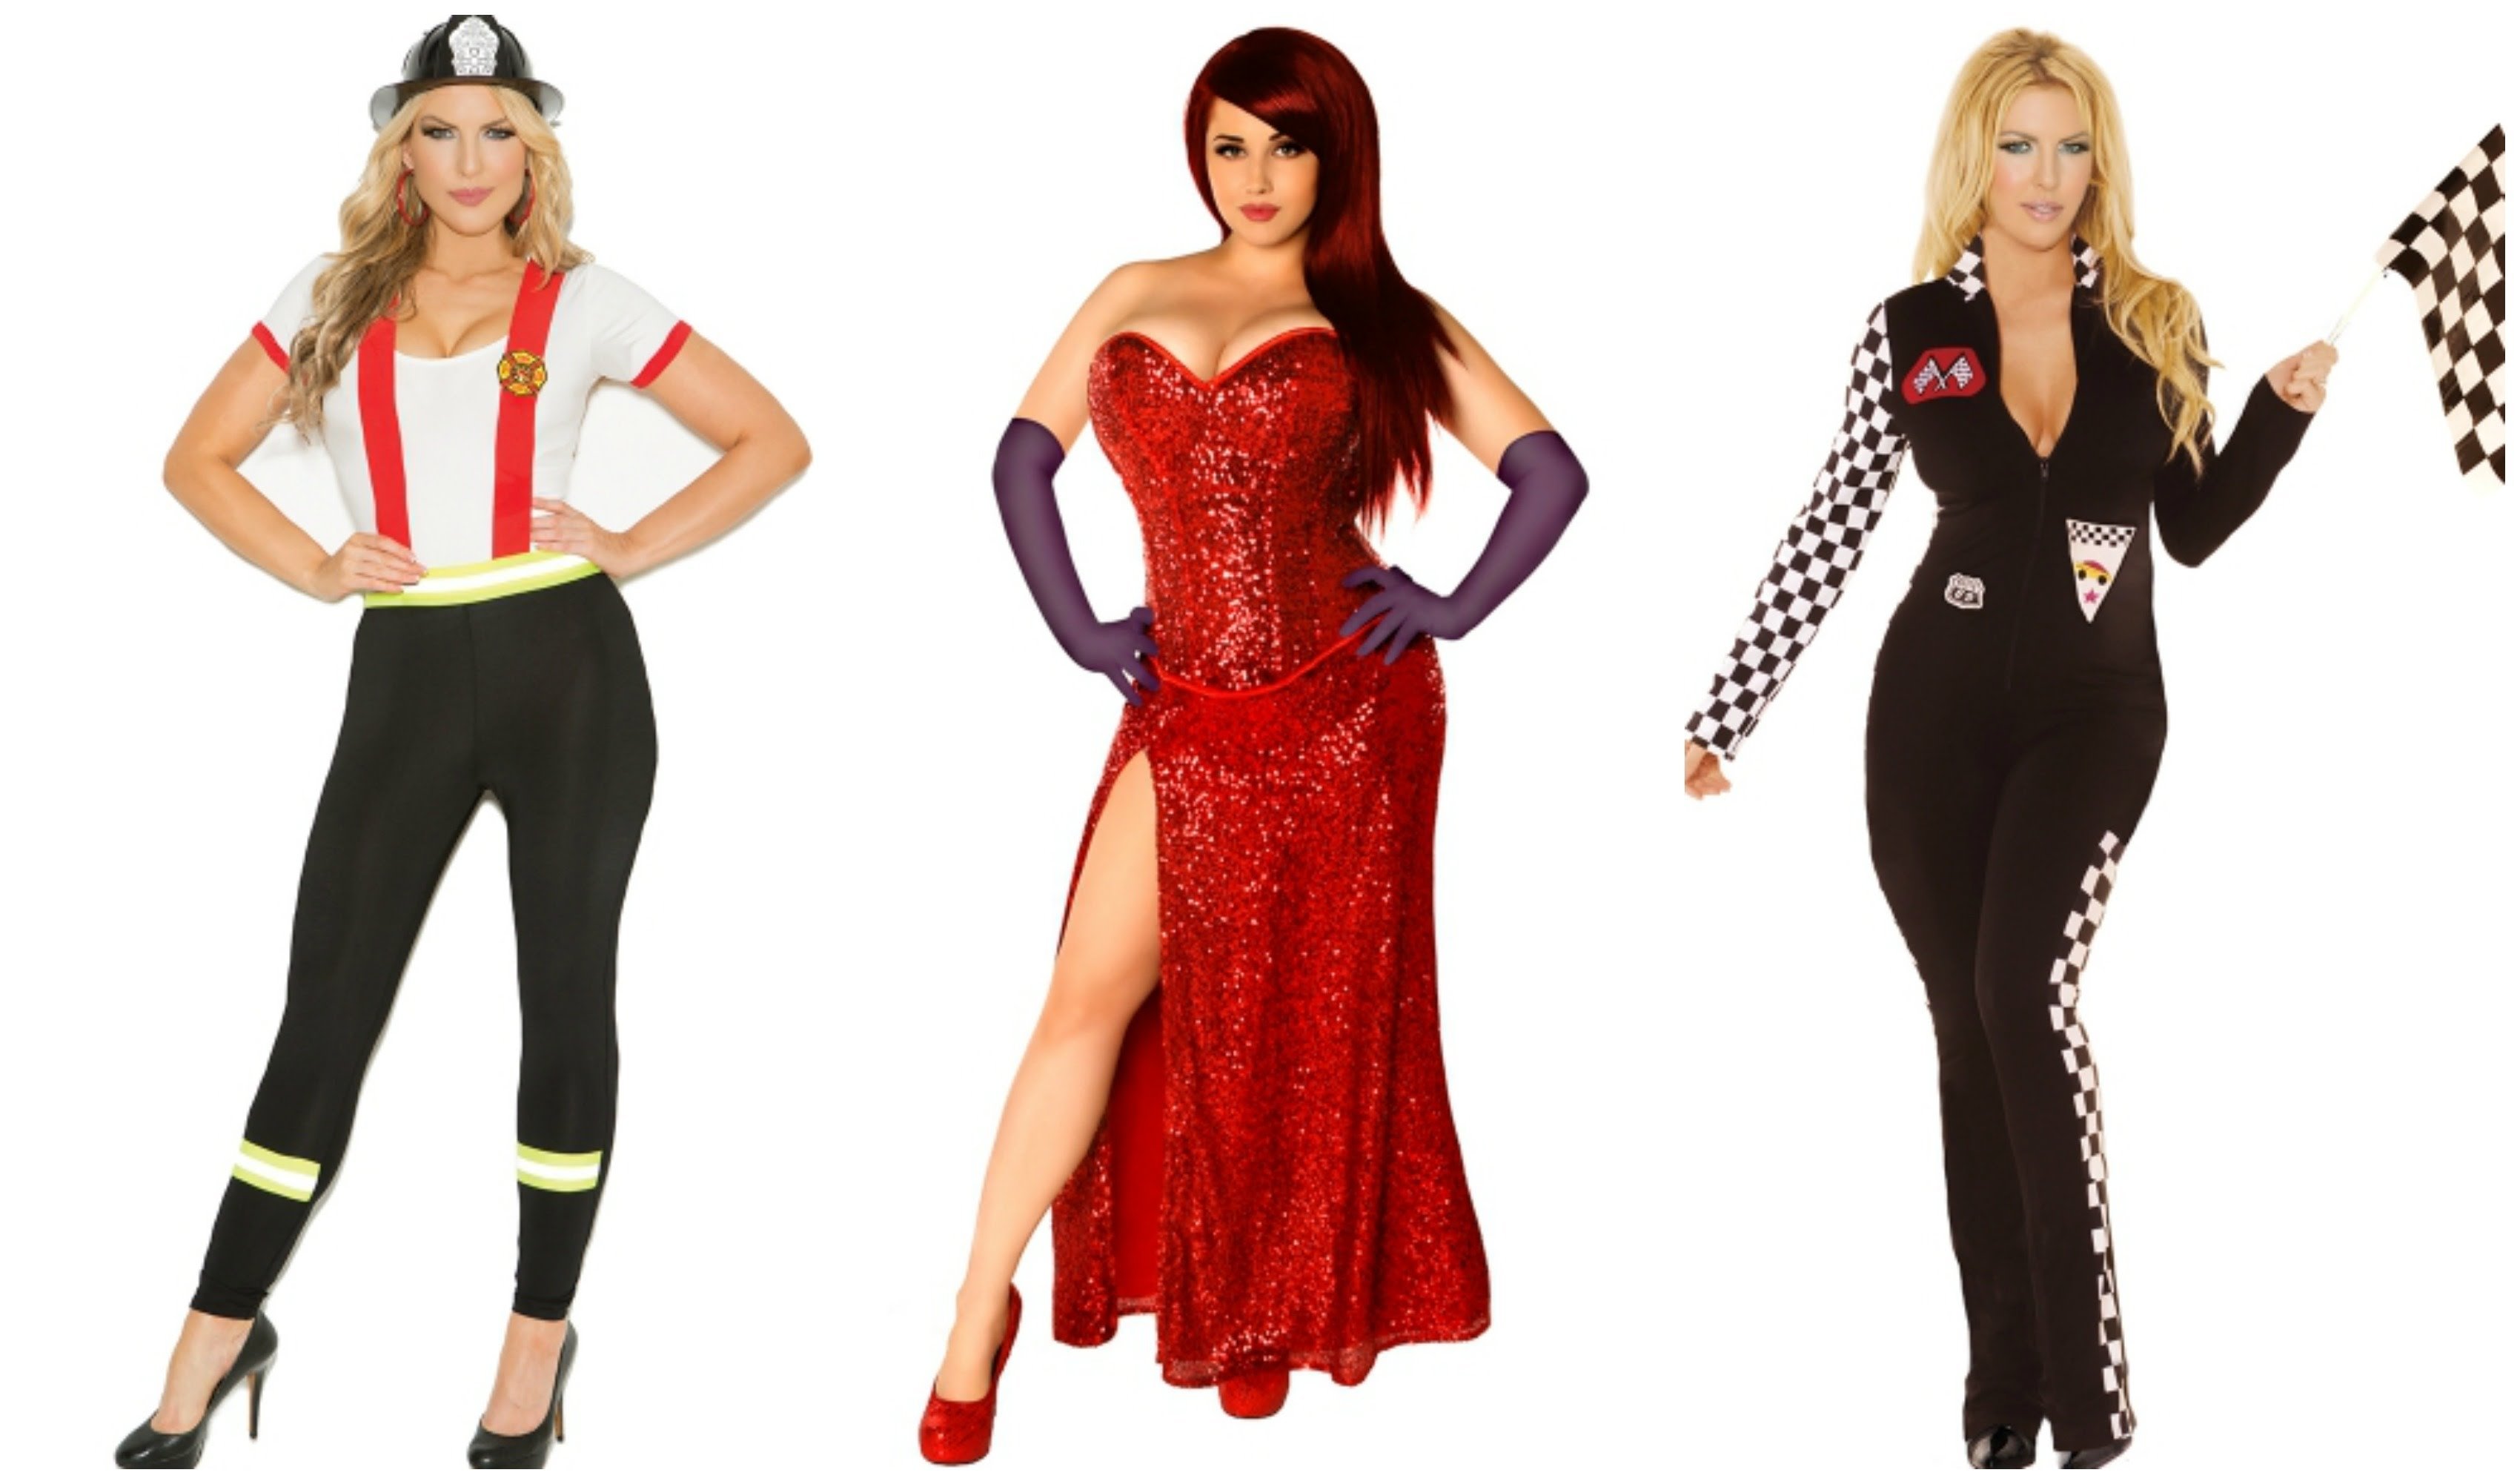 10 Cute Plus Size Halloween Costumes Ideas sexy halloween costumes ideas for plus size women lookbook youtube 2 2022